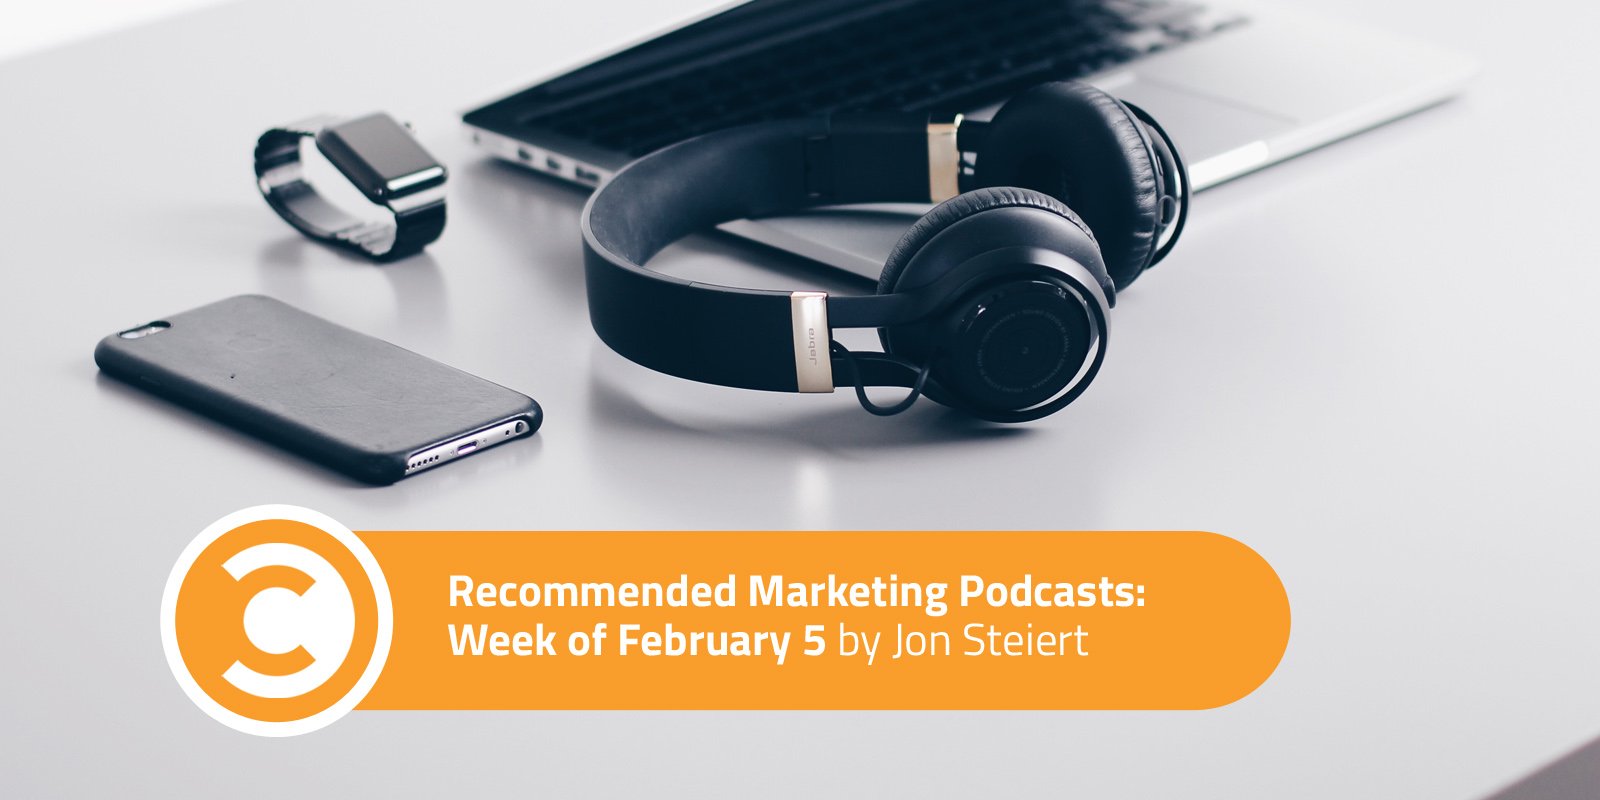 Recommended Marketing Podcasts Week of February 5